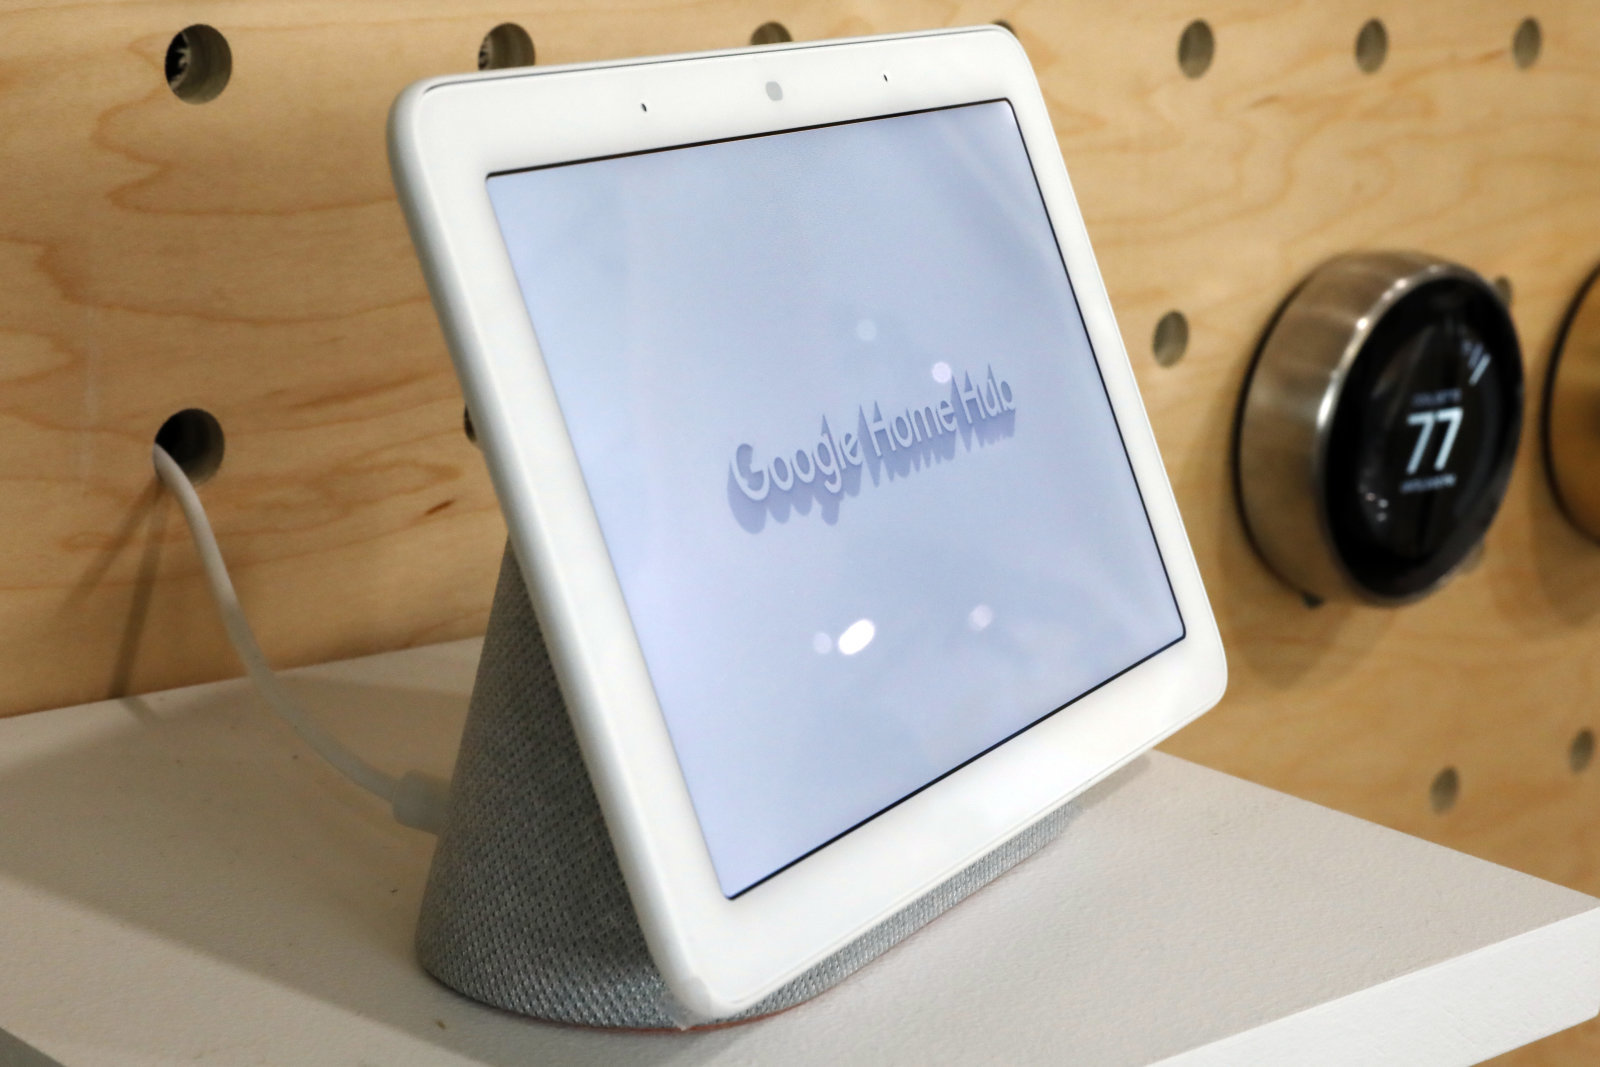 FILE- In this Oct. 9, 2018, file photo a Google Home Hub is displayed in New York. Technology companies are pushing the “smart home,” selling appliances and gadgets that offer internet-connected conveniences you didn’t know you needed. (AP Photo/Richard Drew, File)